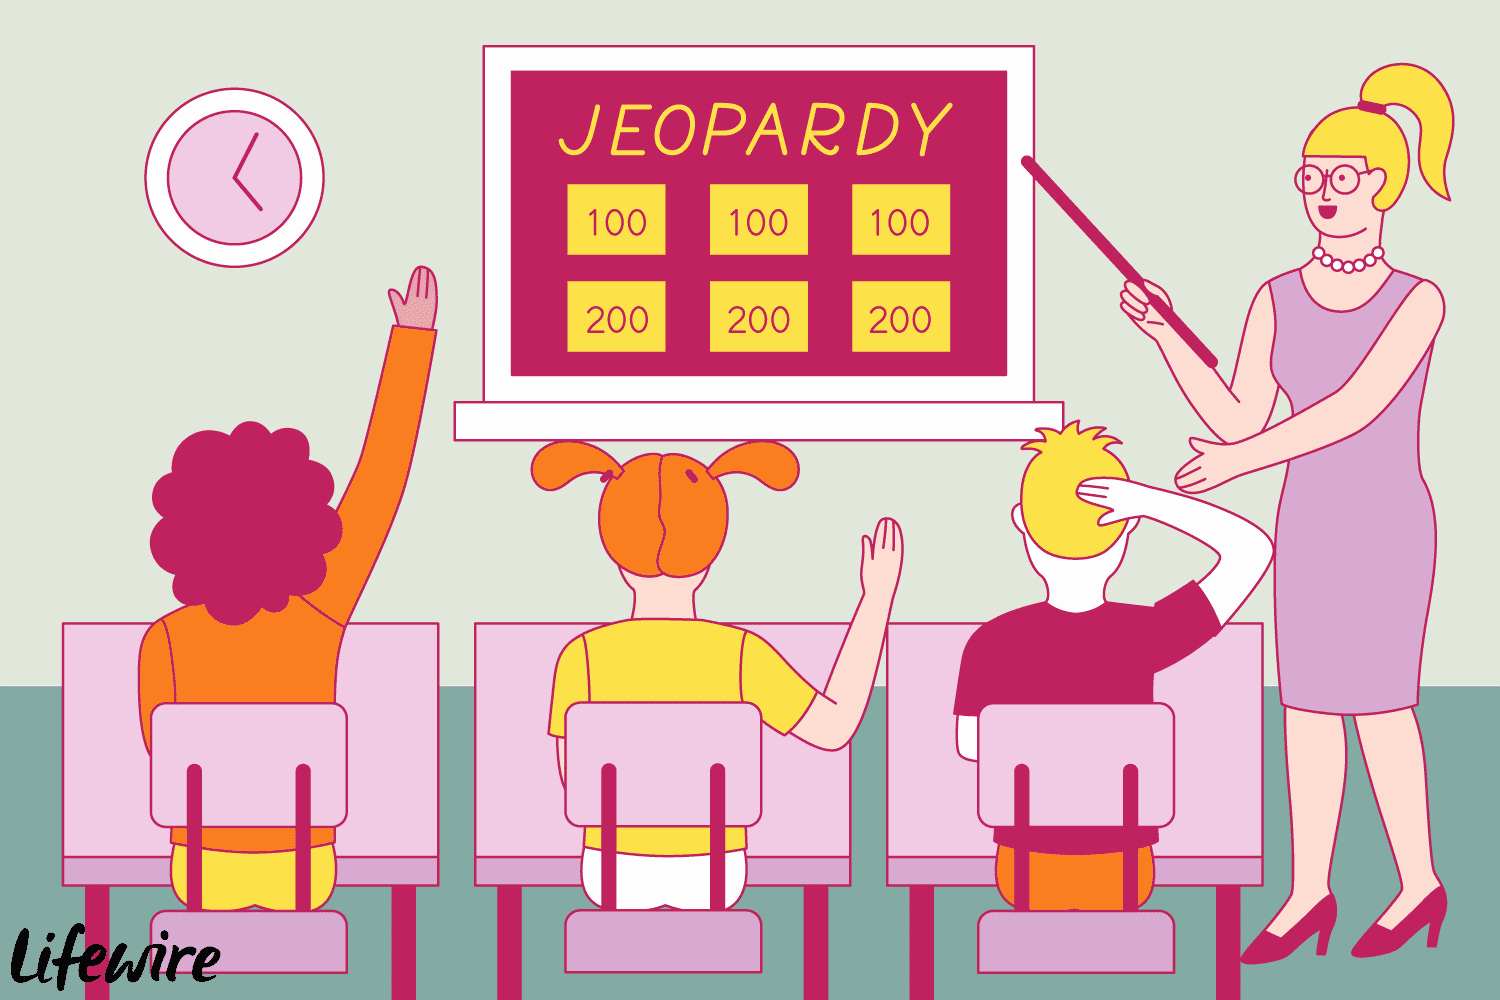 Free Jeopardy Powerpoint Template Elegant 11 Best Free Jeopardy Templates for the Classroom